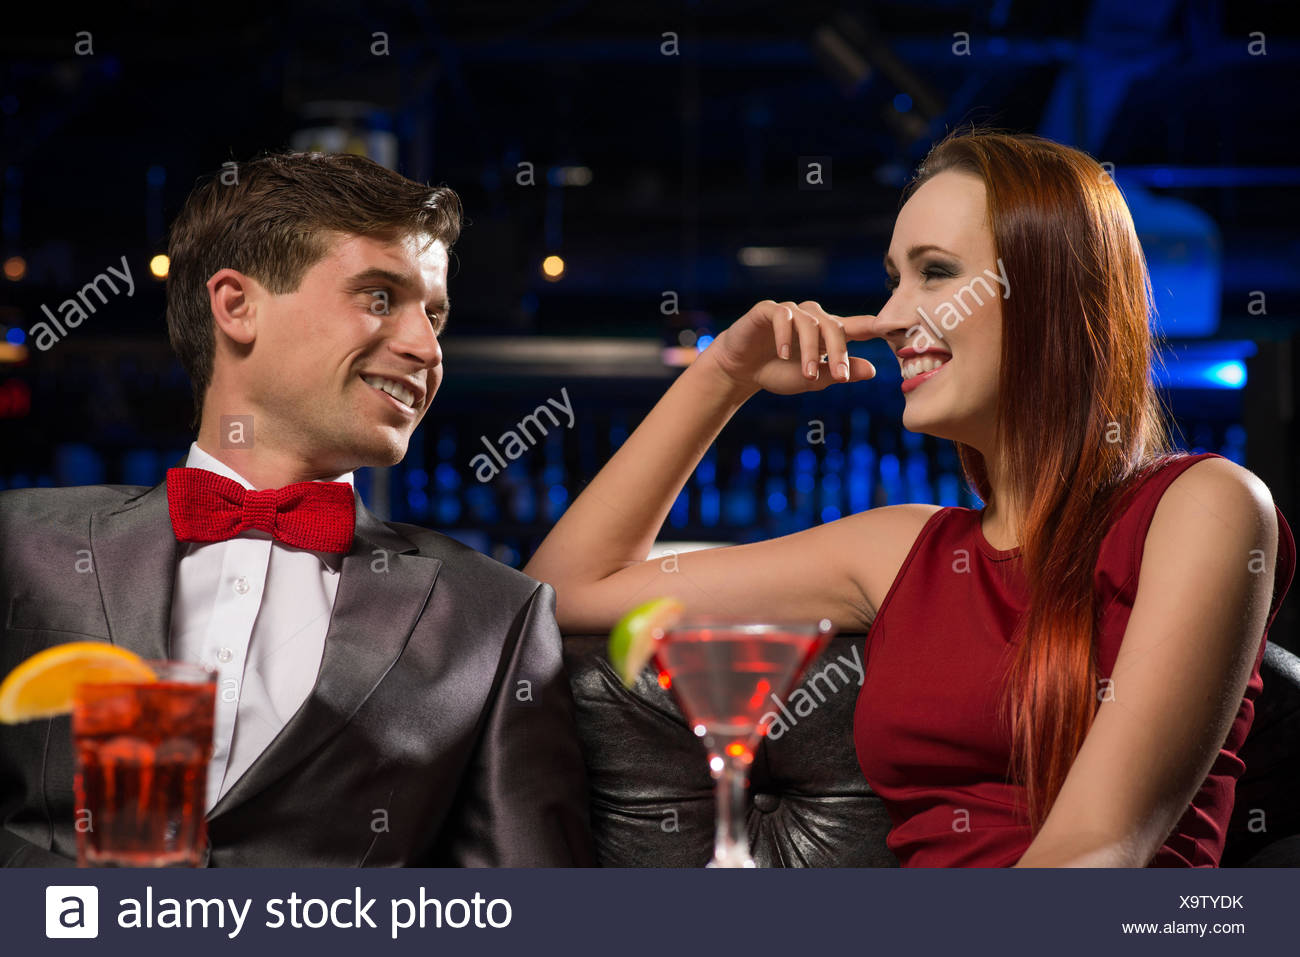 Image result for talking at a nightclub stock photos